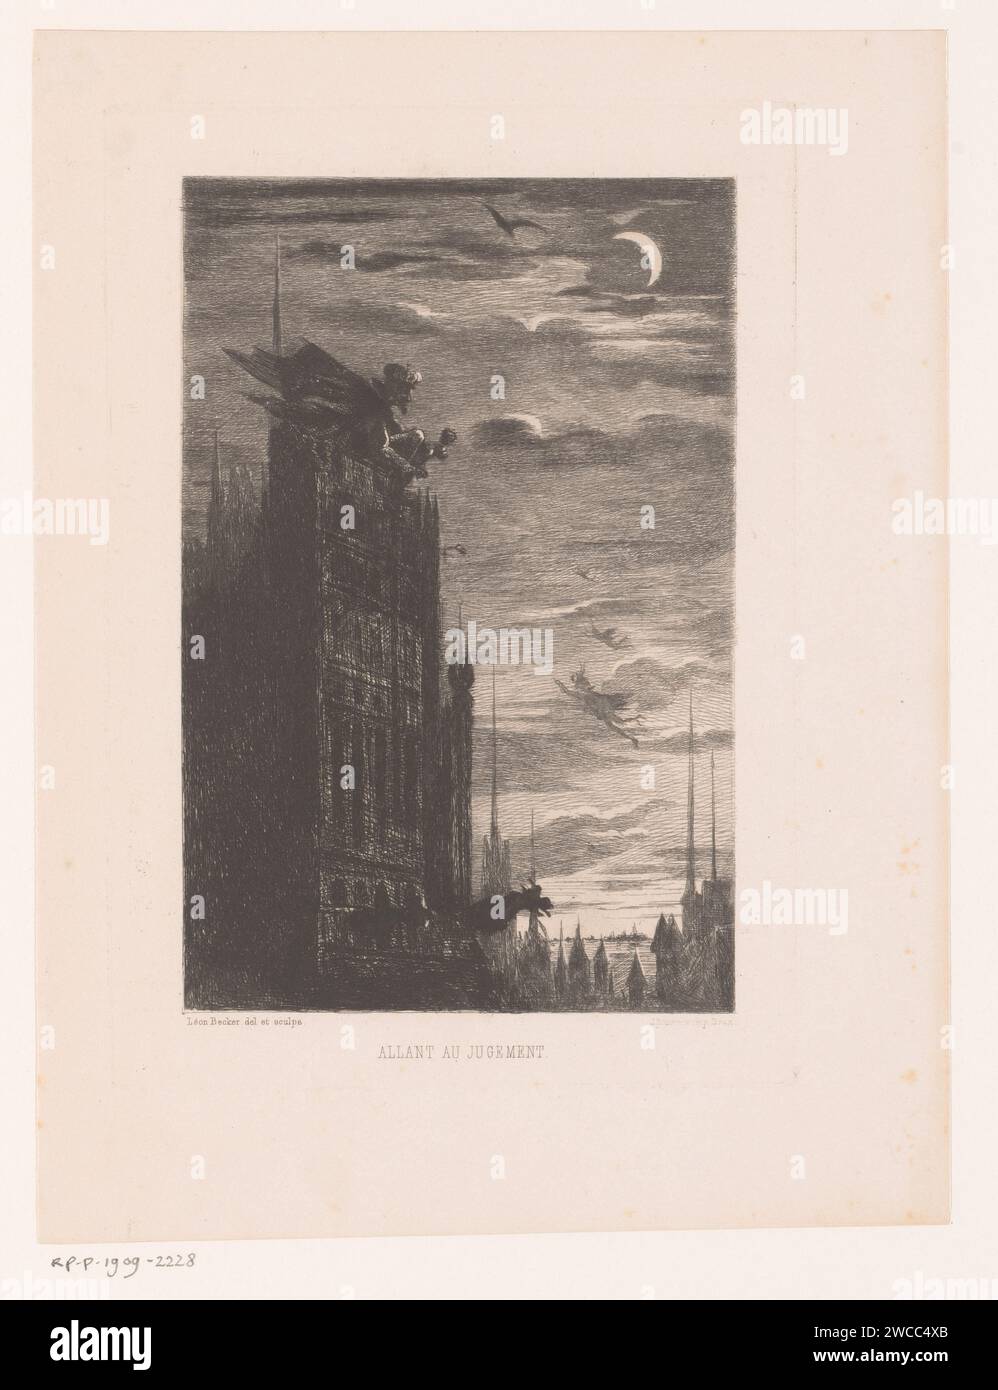 Night face with church tower and devils, Léon Becker, 1869 print  printer: Brusselspublisher: Paris paper etching devil(s) and demons. parts of church exterior and annexes Stock Photo